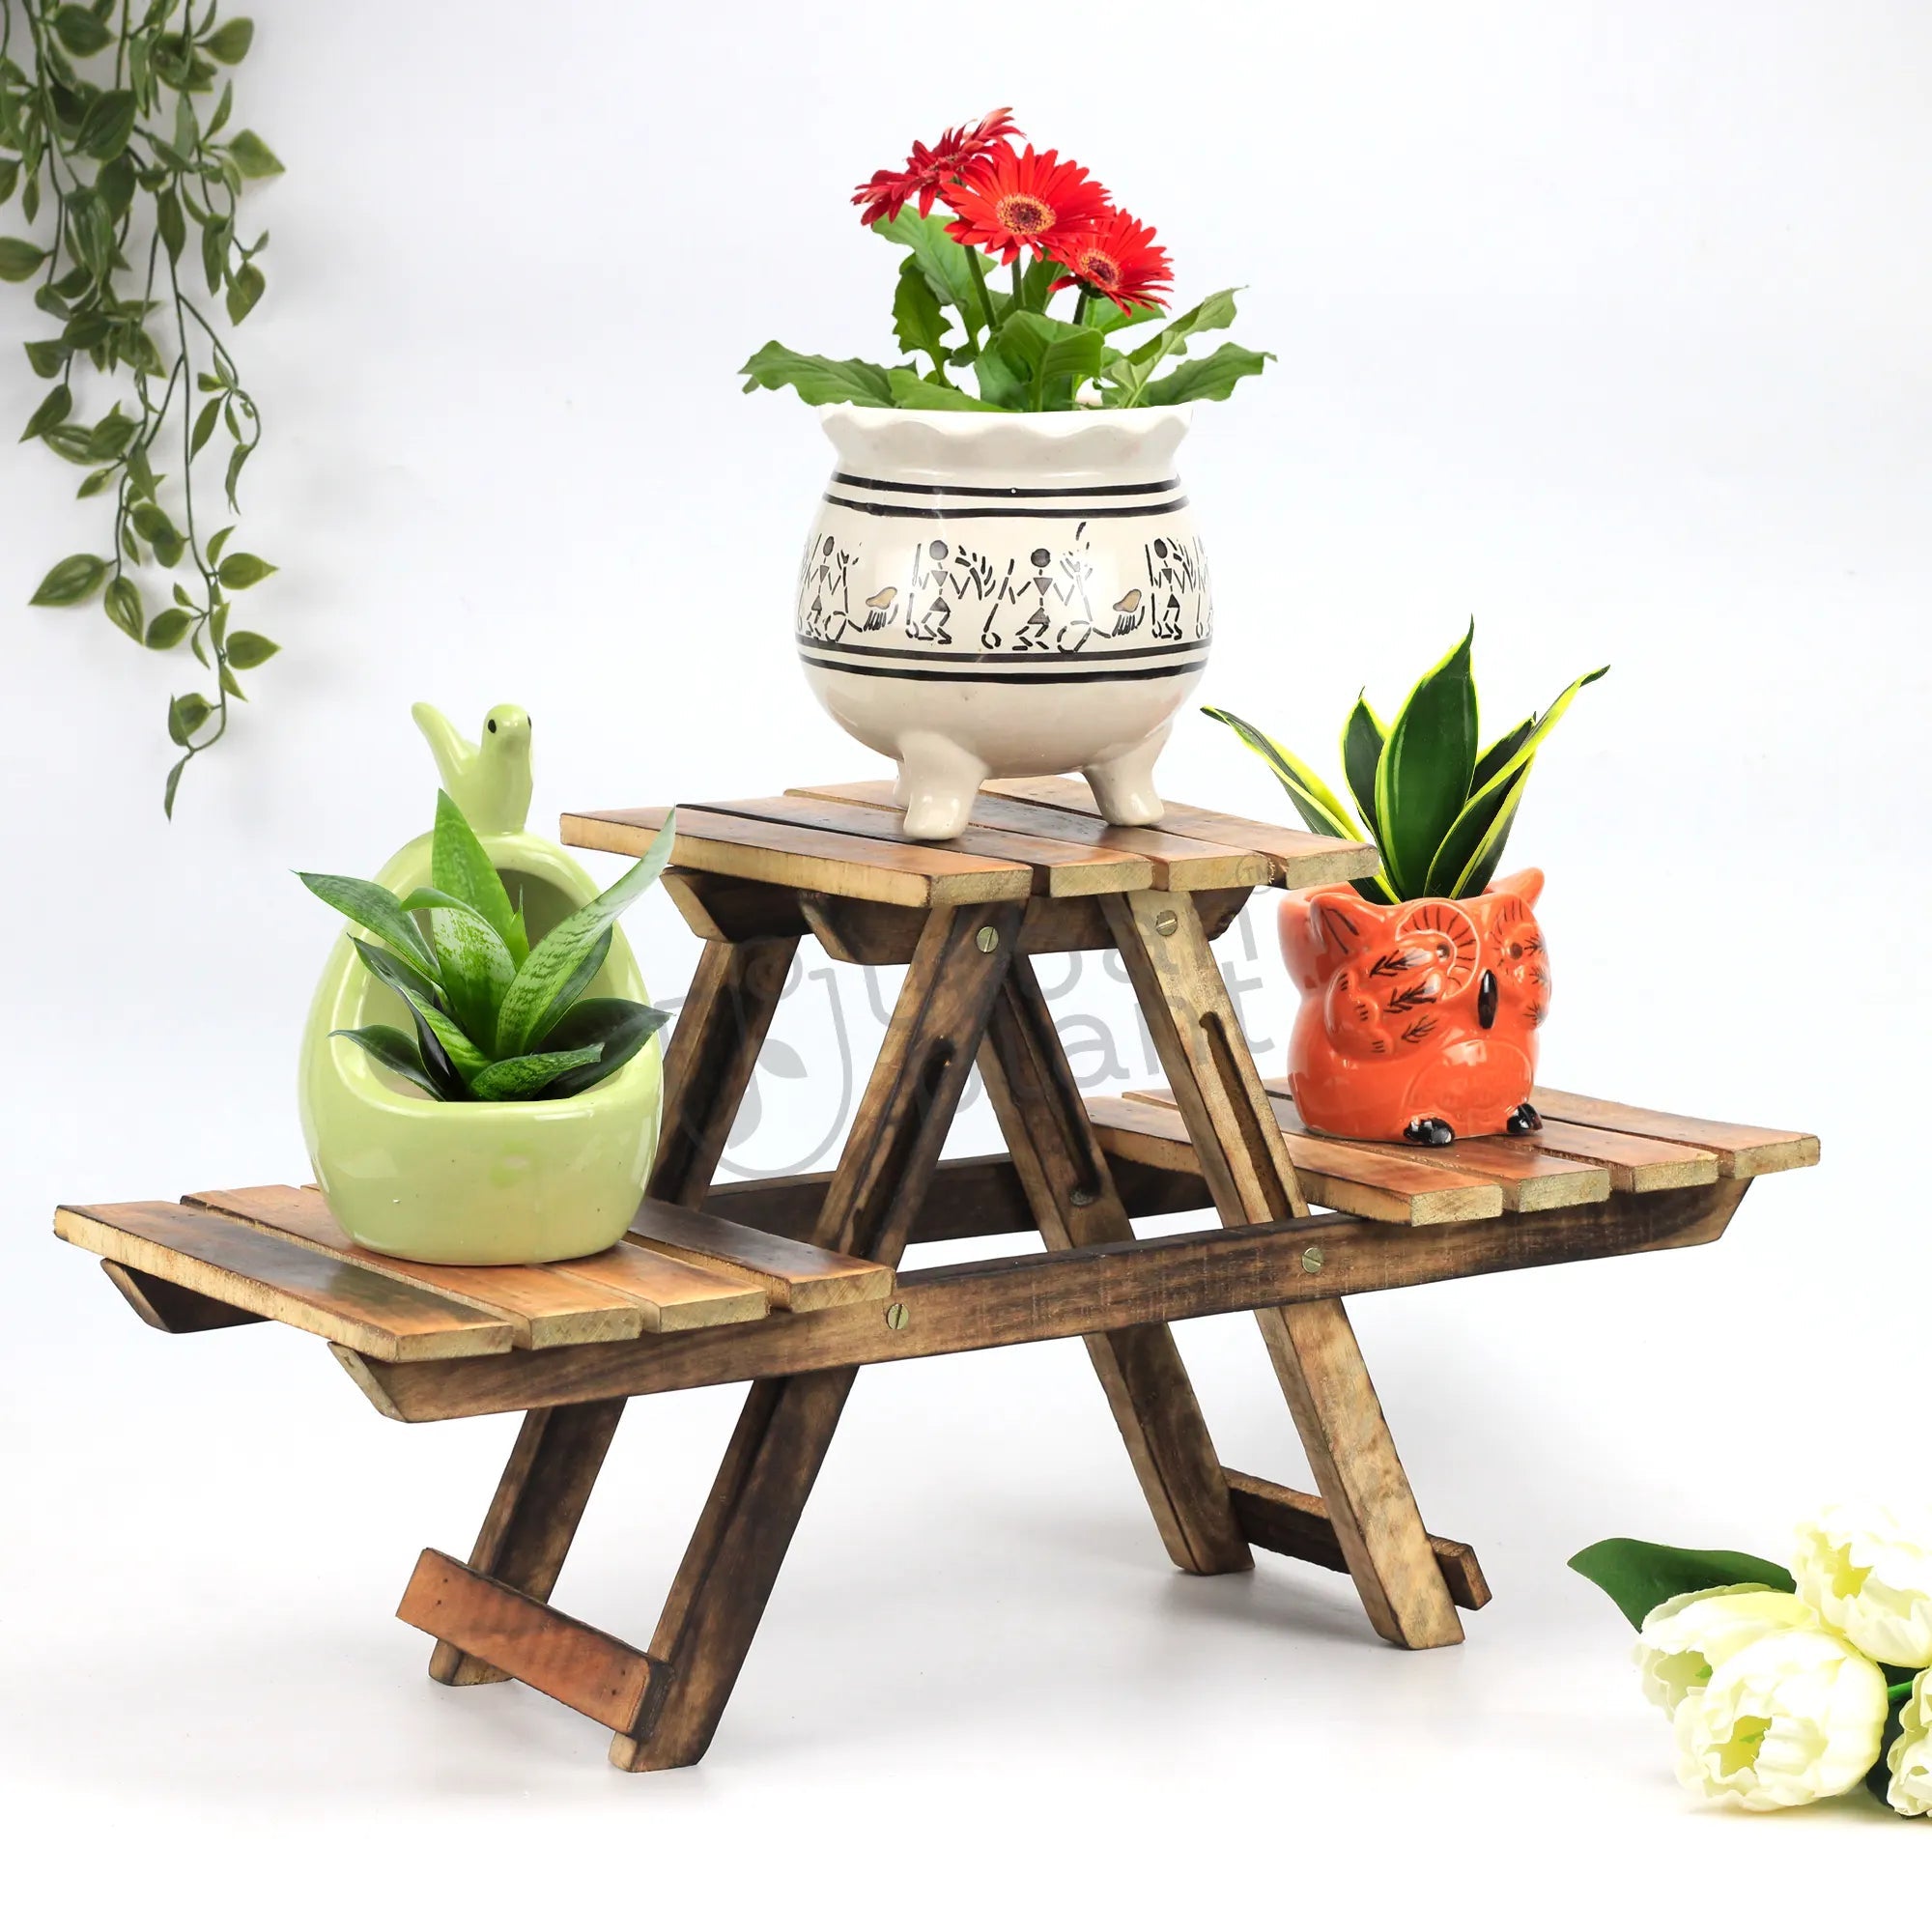 Woosty Wooden Planter Stand Pot Stand Urban Plant 